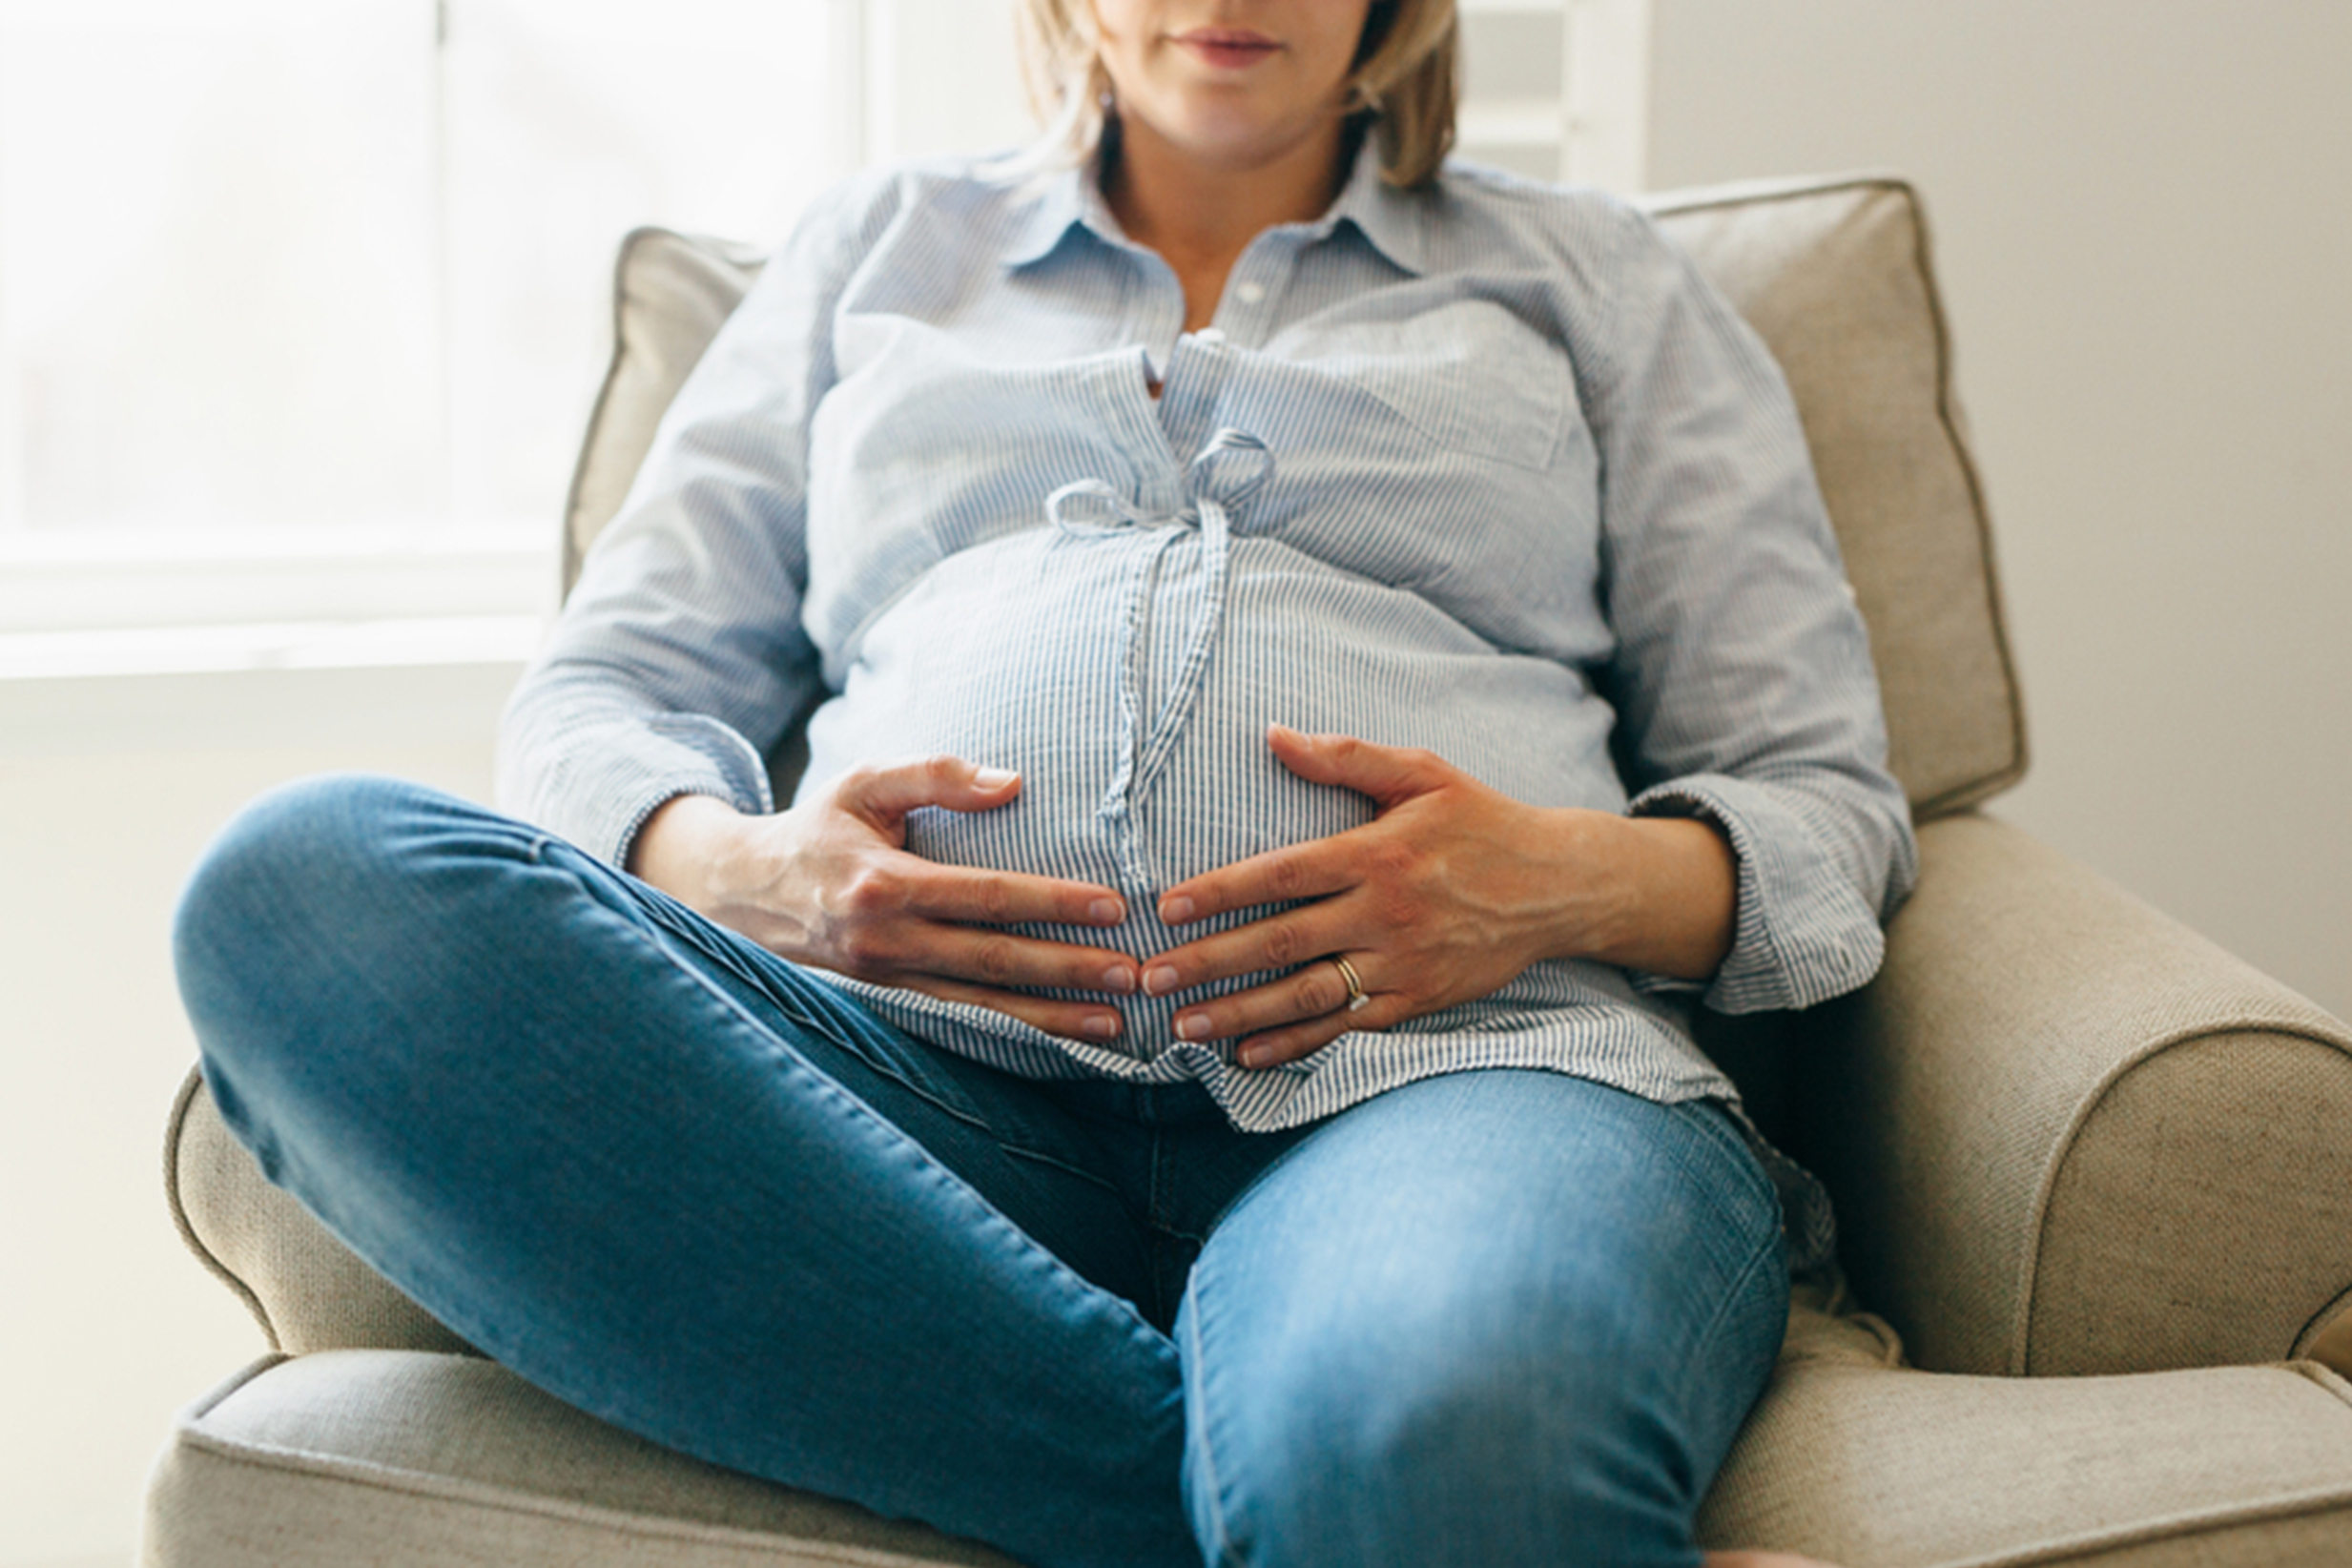 Pregnant woman in jeans sitting on chair